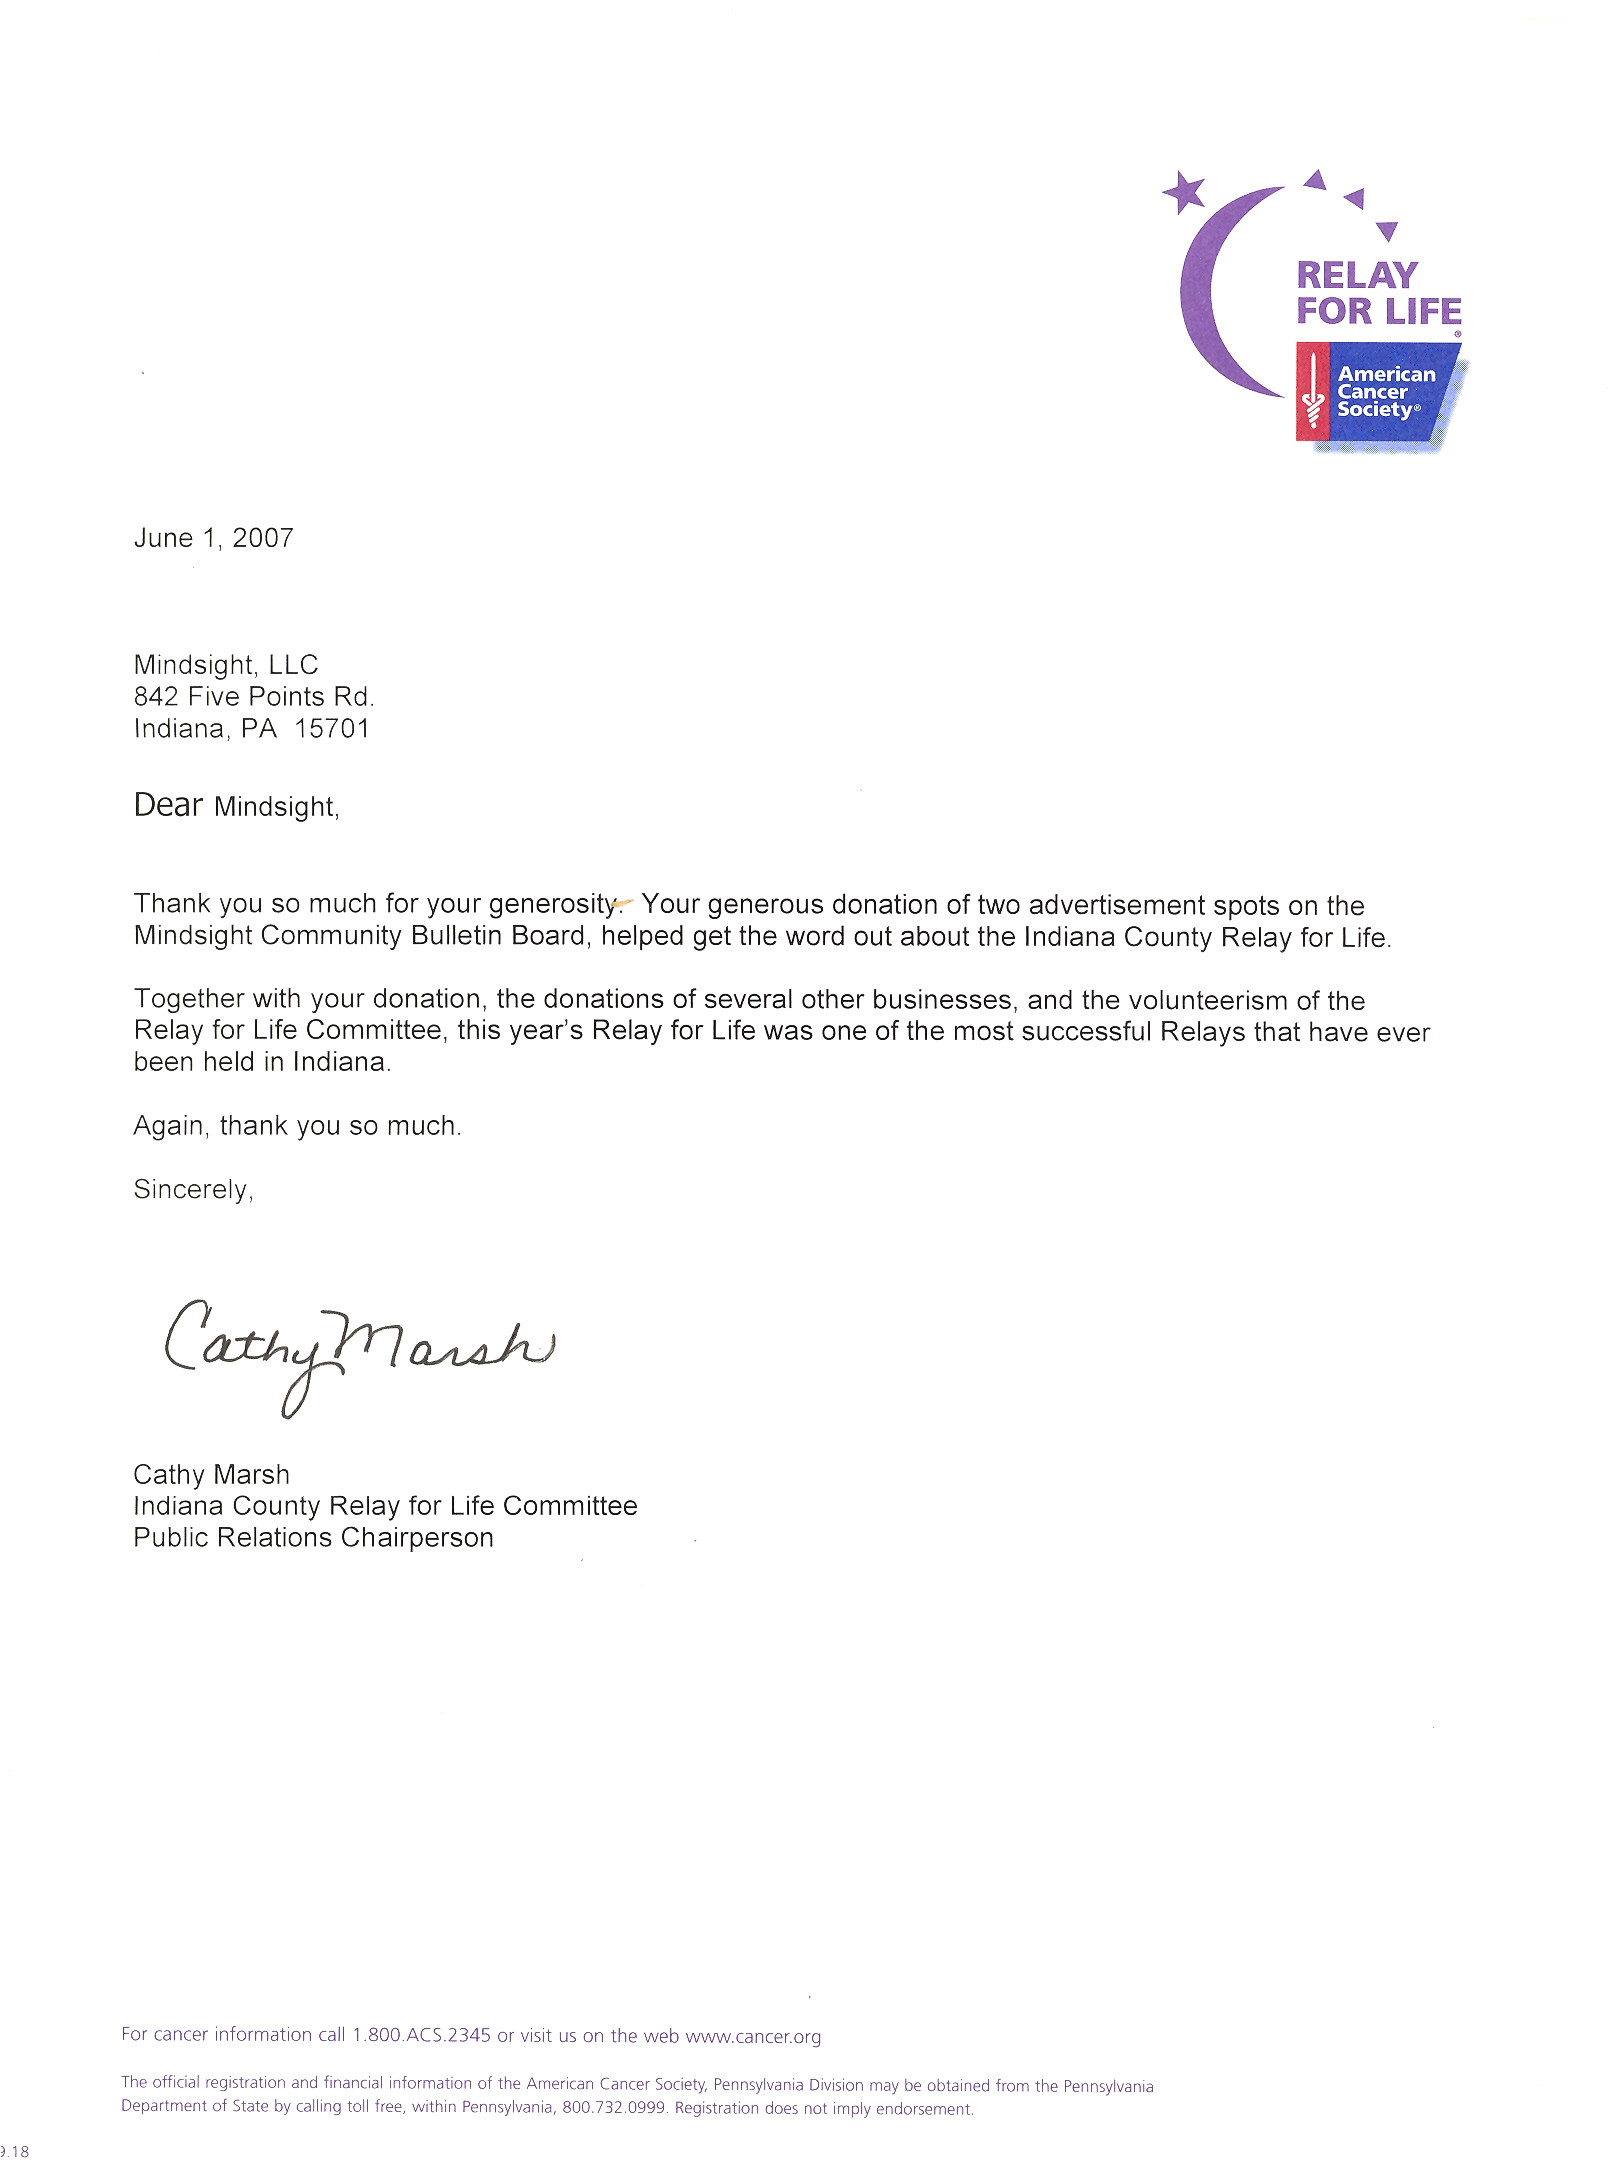 Relay for Life Donation Email Templates Mindsight Llc Community B B Thank You Notes